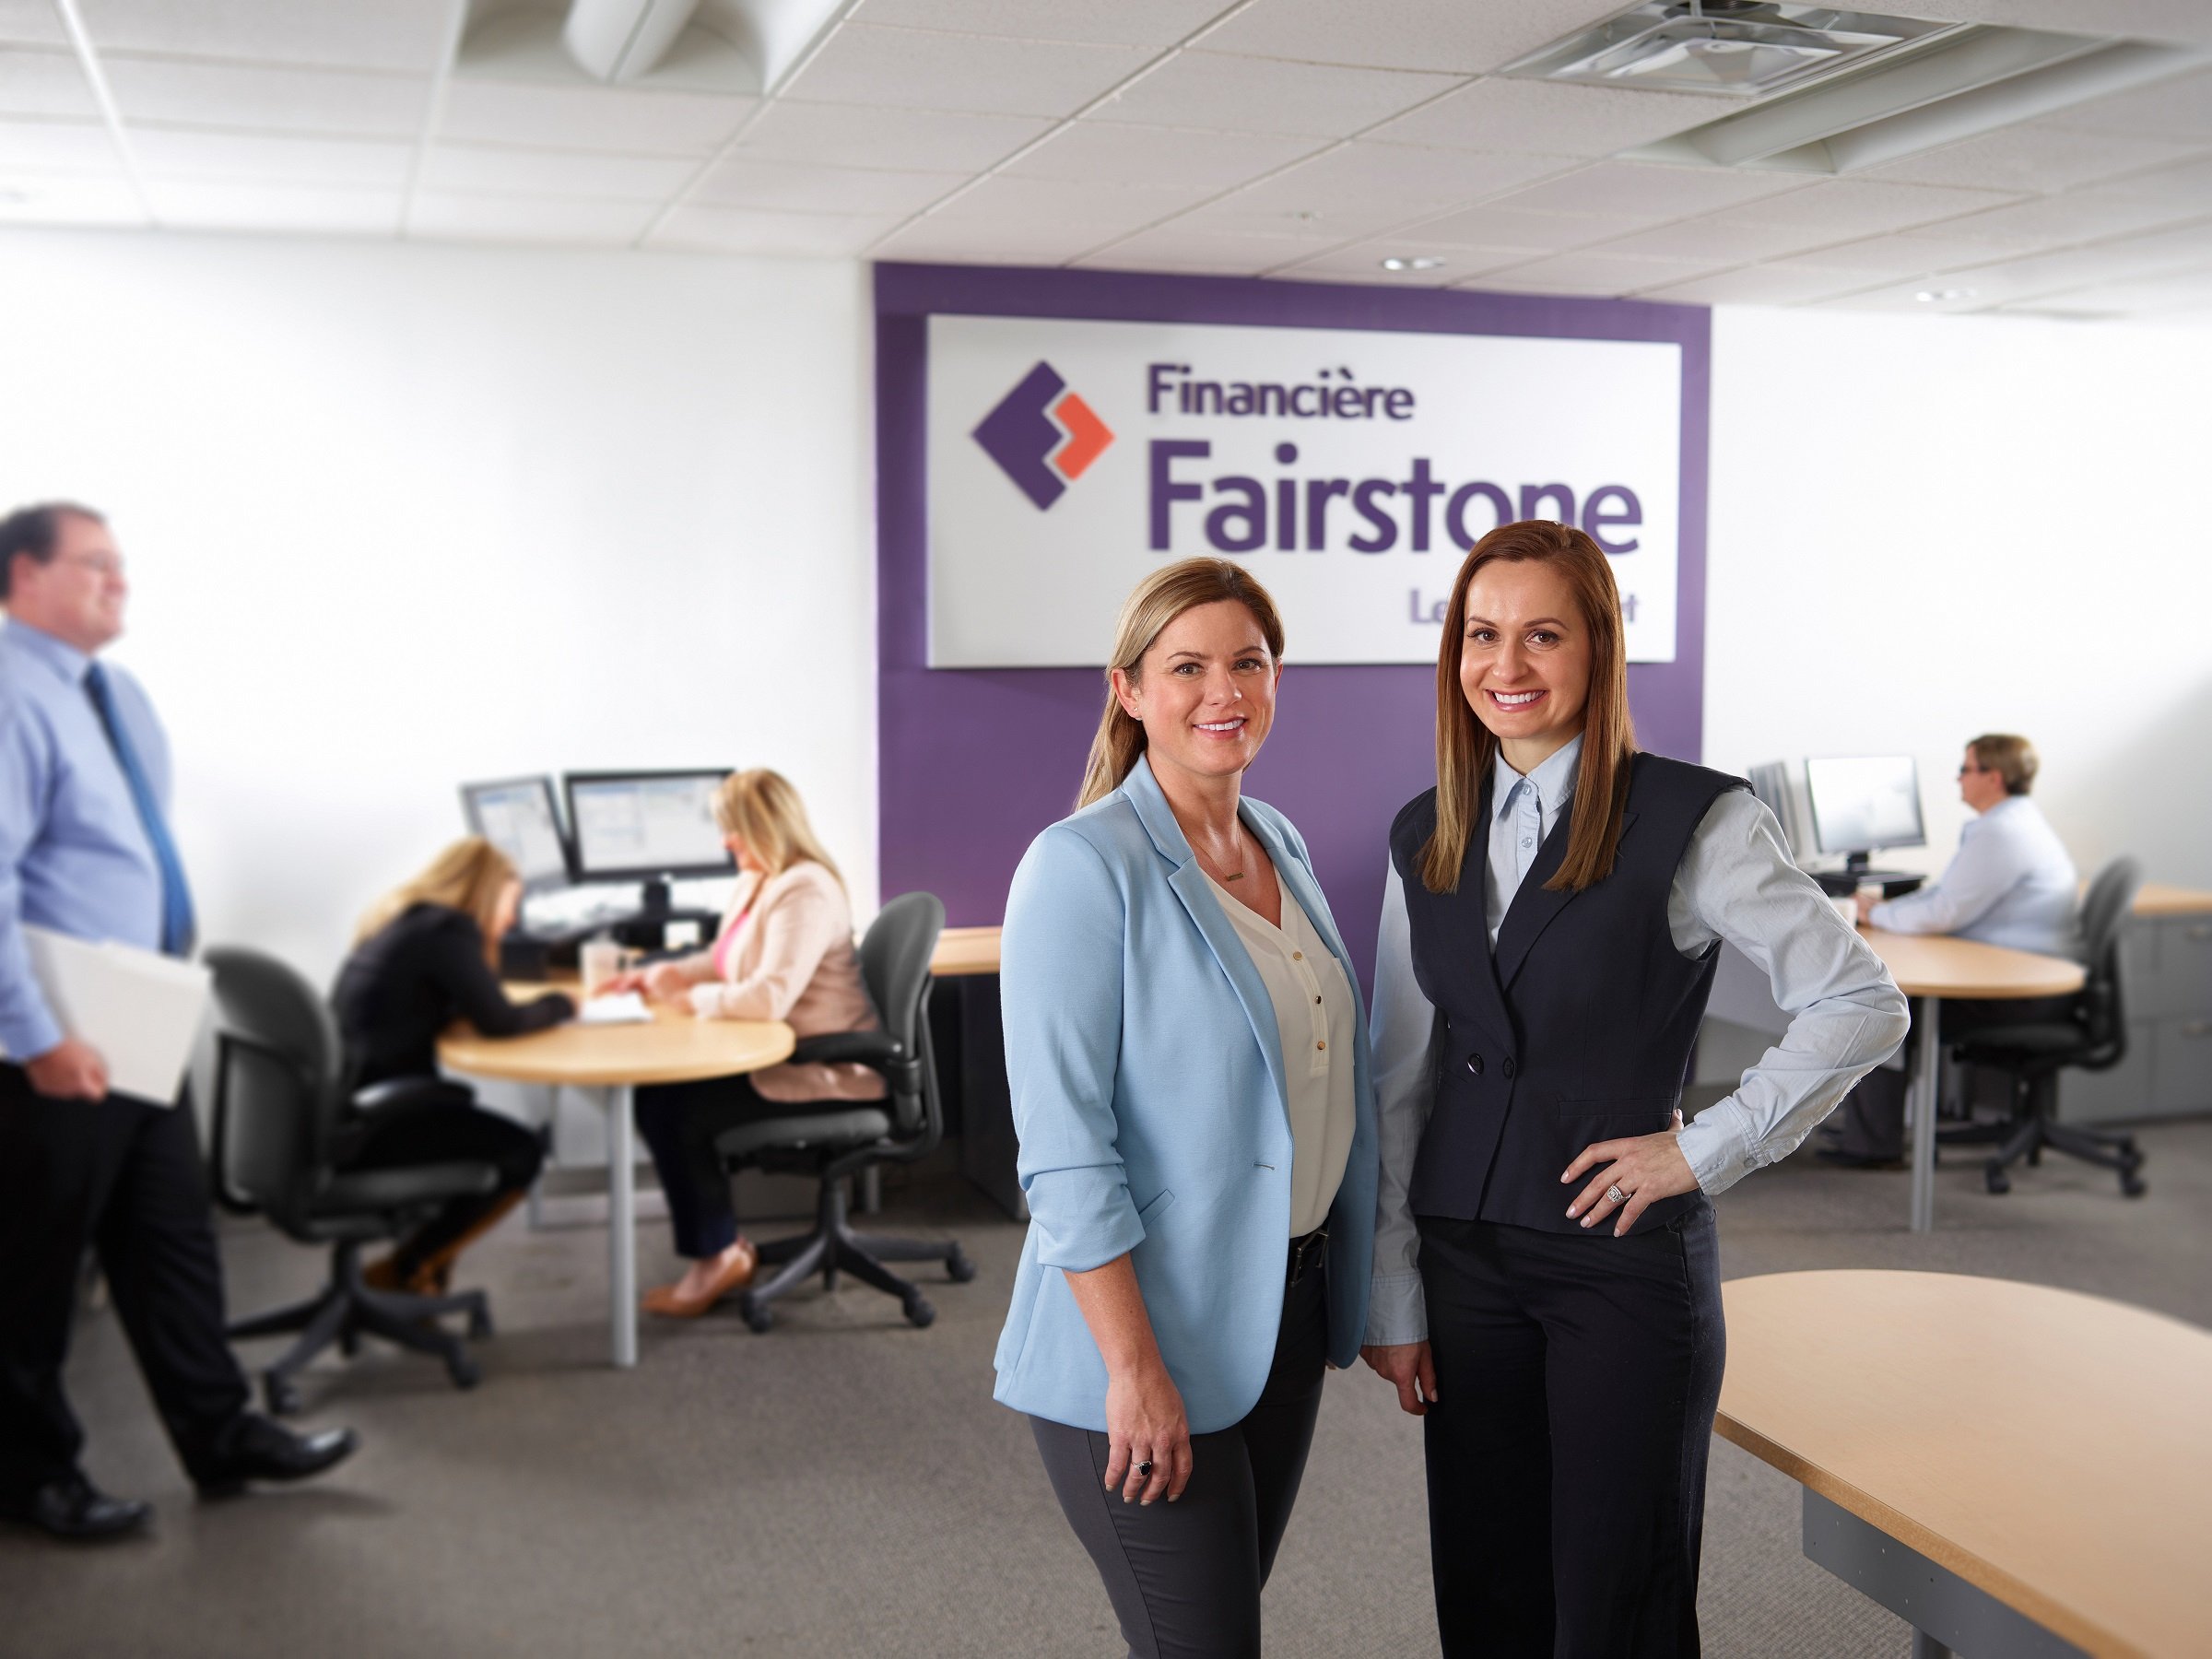 About Fairstone